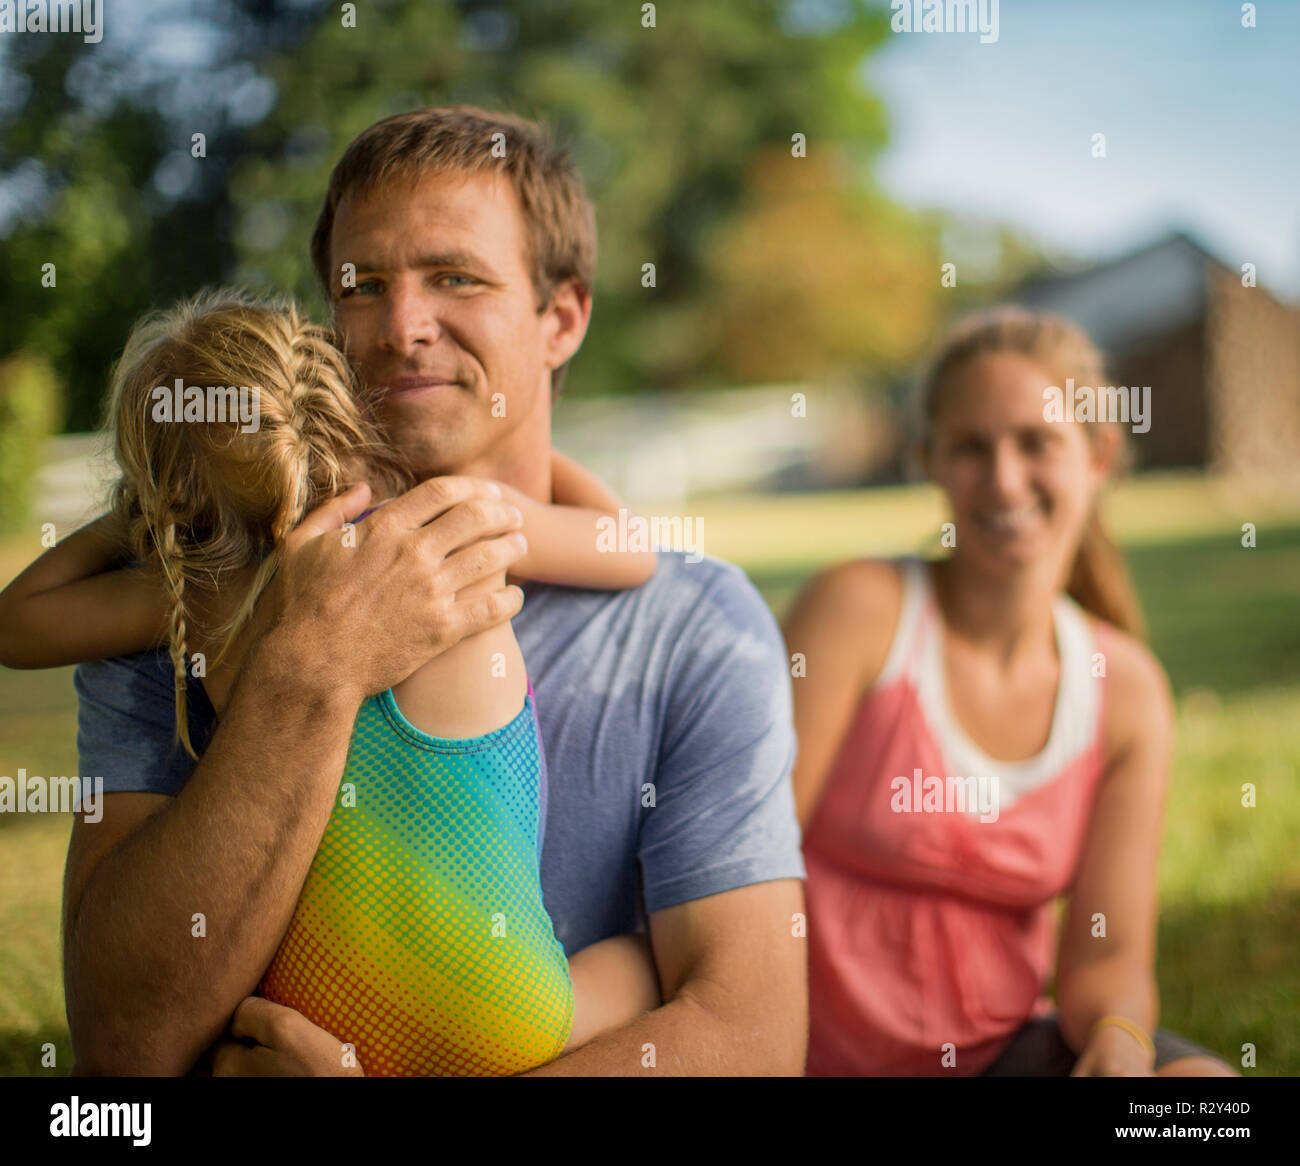 Portrait of a middle-aged father gently hugging his young daughter. Stock Photo